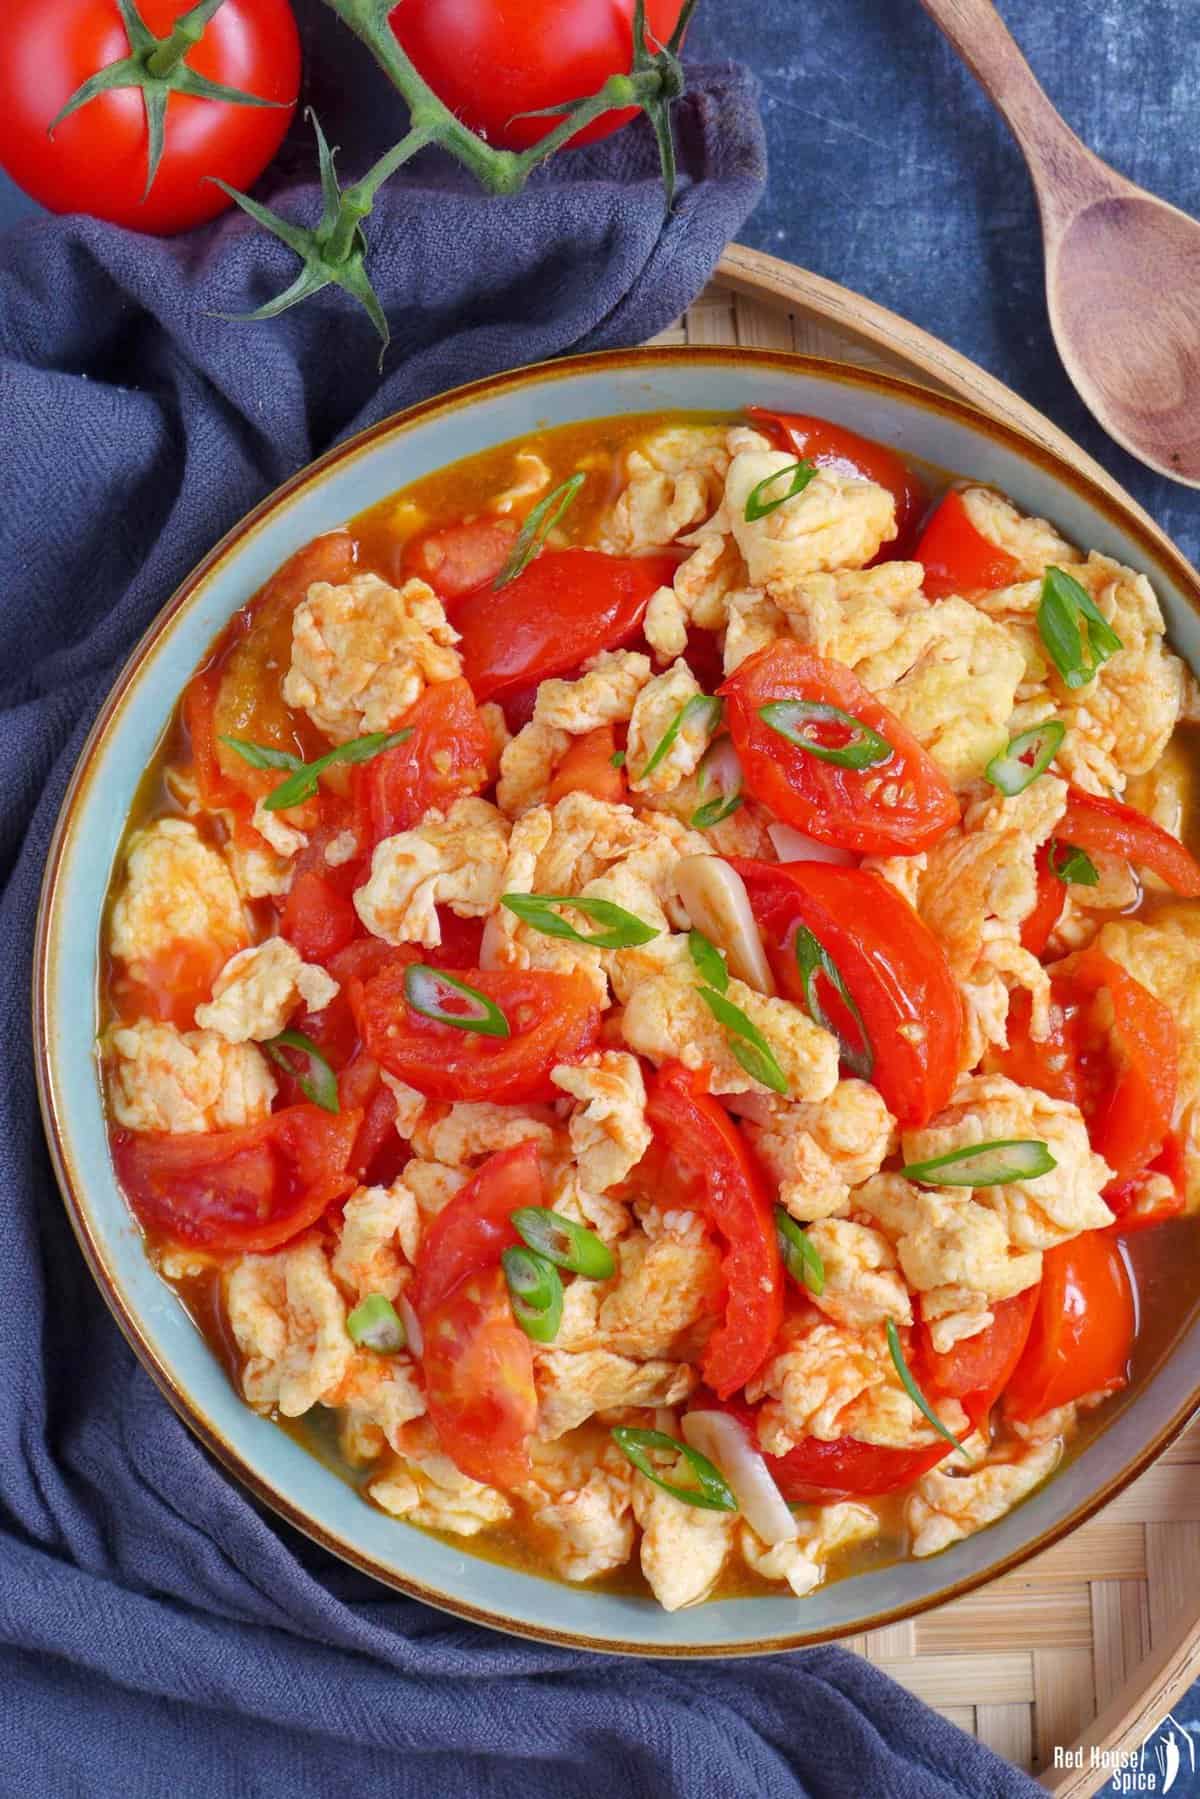 tomato and egg stir-fry in a plate.